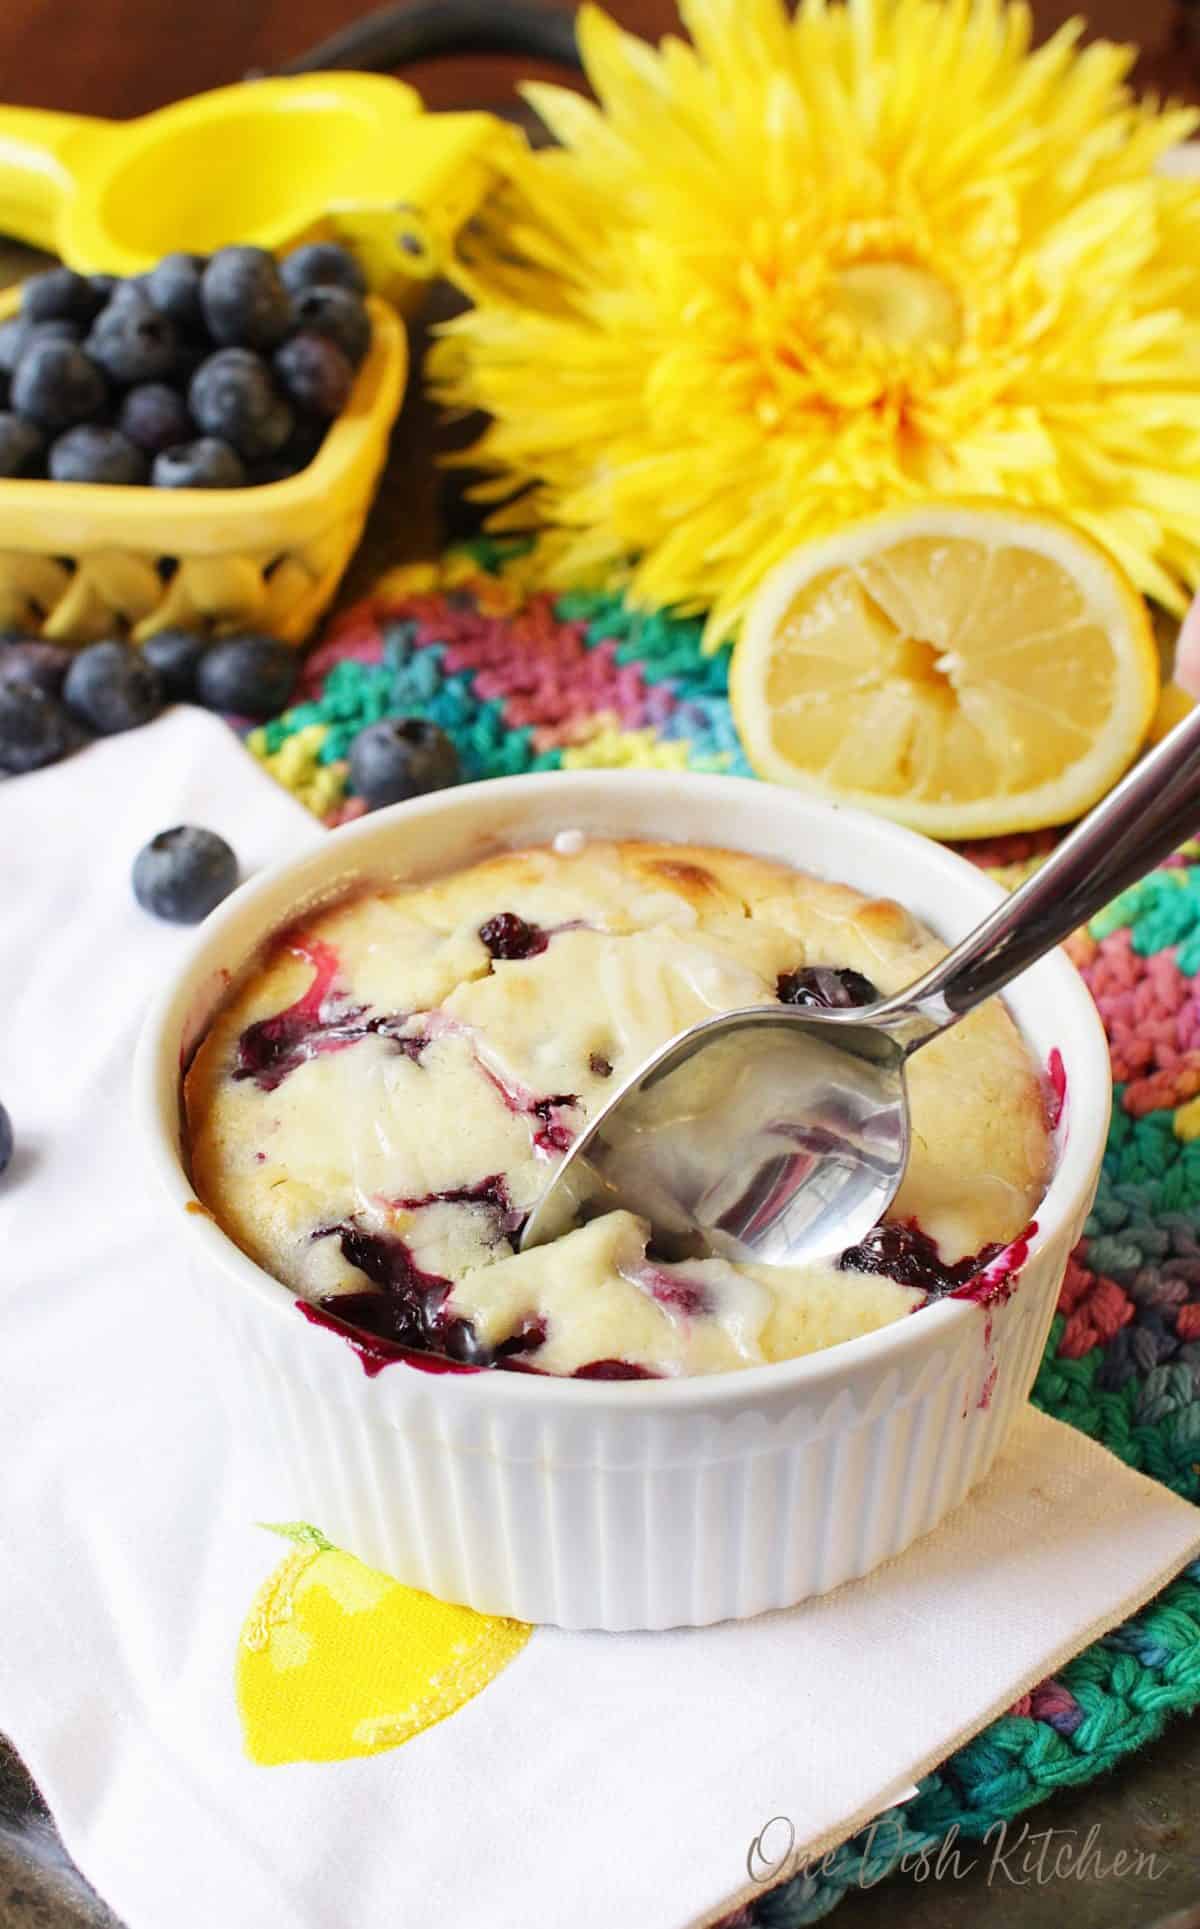 A spoonful of lemon blueberry muffin in a ramekin topped with sugar glaze on a metal tray surrounded by blueberries, half of a lemon, and a big yellow flower.